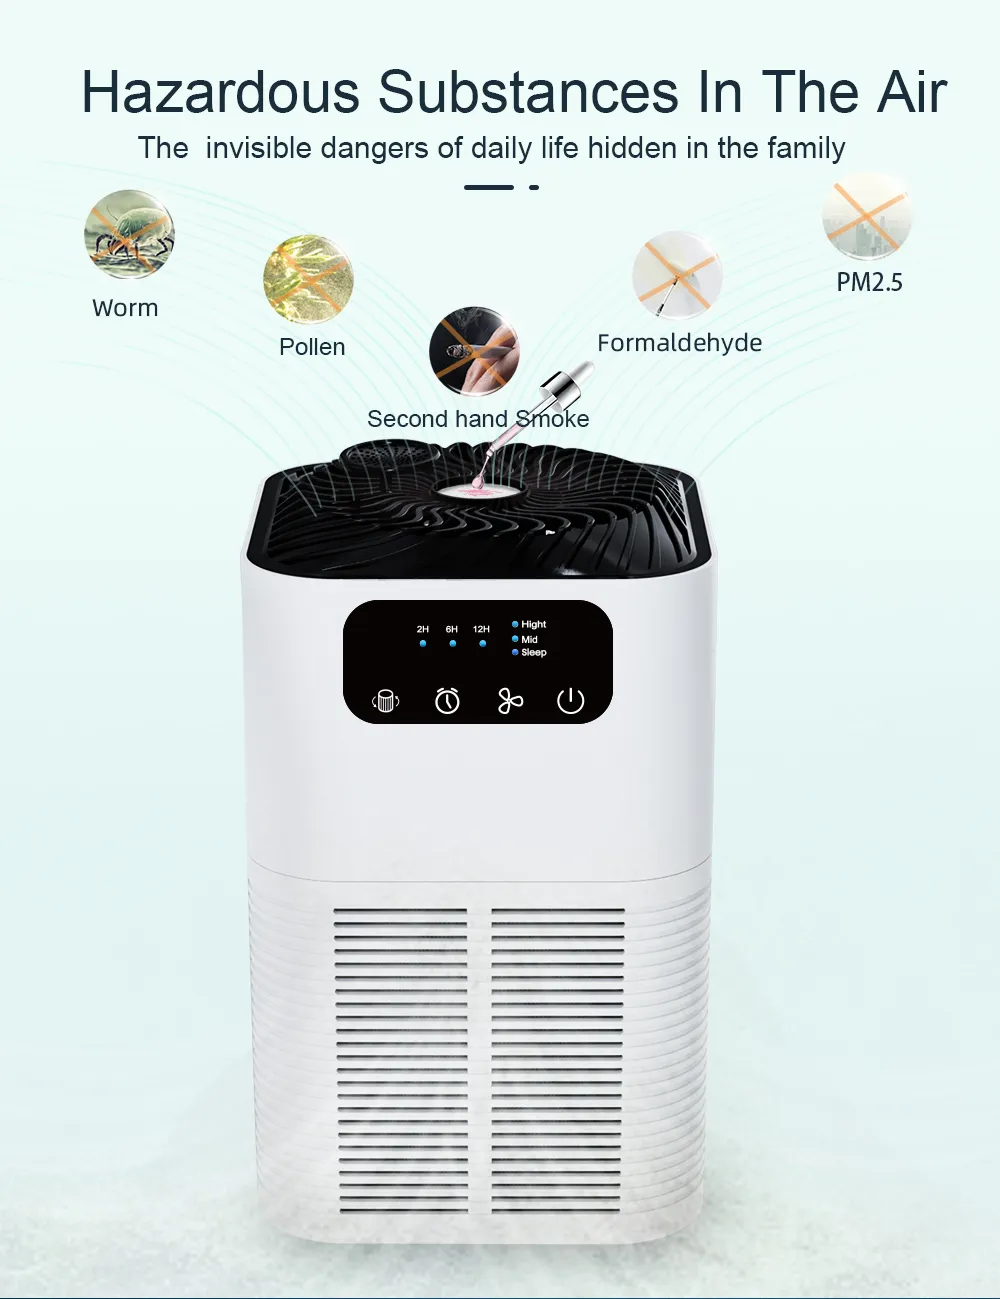 Ionizer Air Purifier with Aroma Diffuser GL-K804